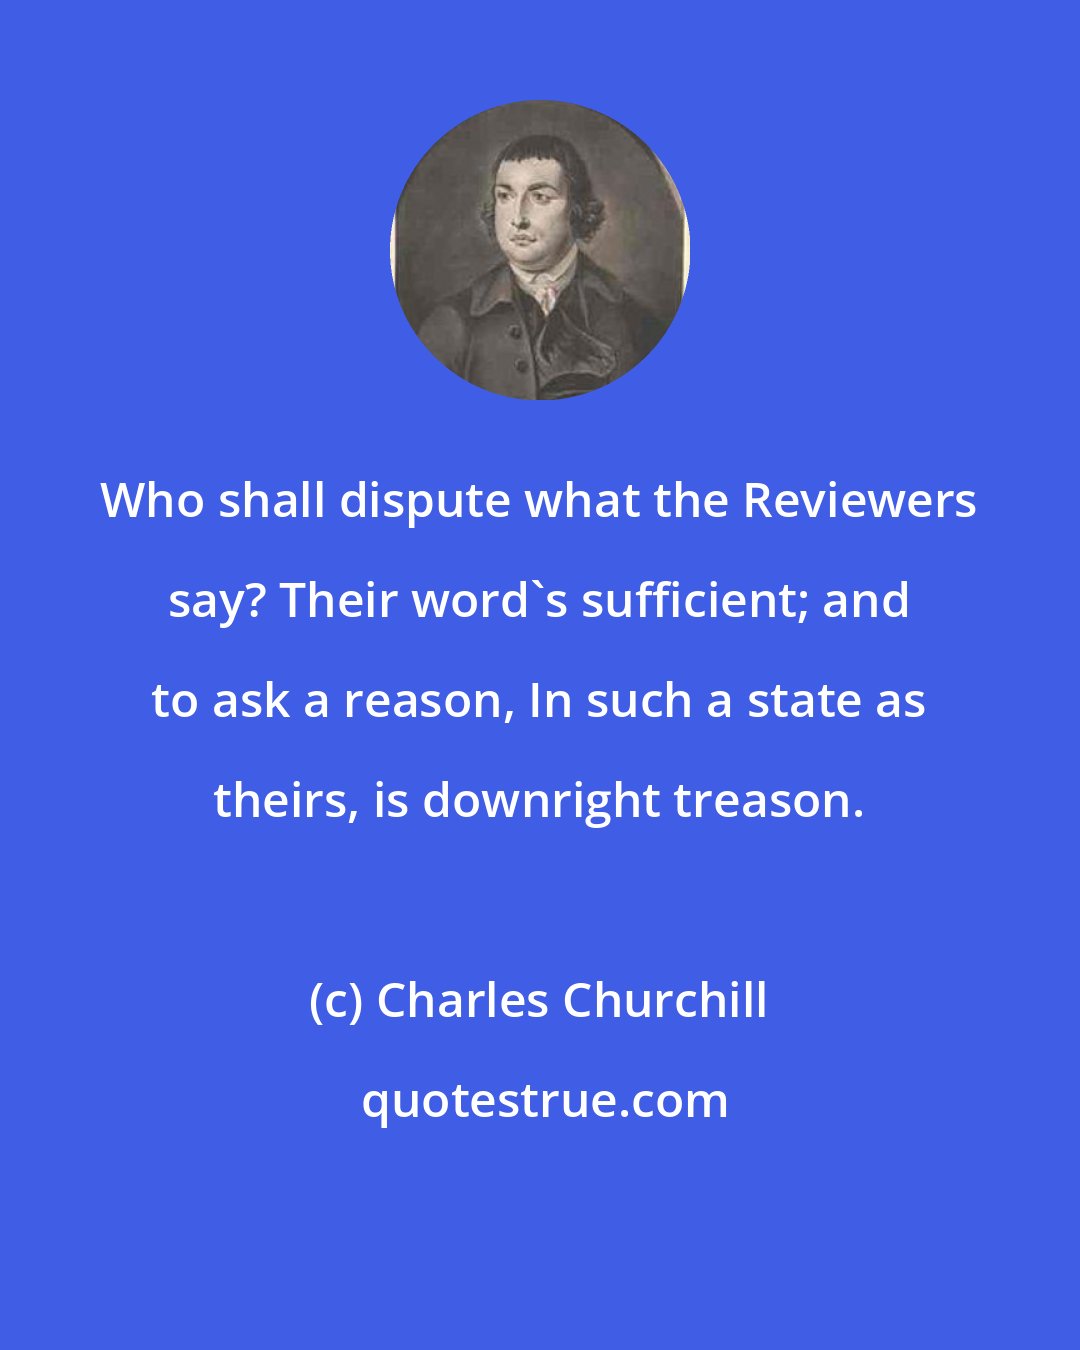 Charles Churchill: Who shall dispute what the Reviewers say? Their word's sufficient; and to ask a reason, In such a state as theirs, is downright treason.